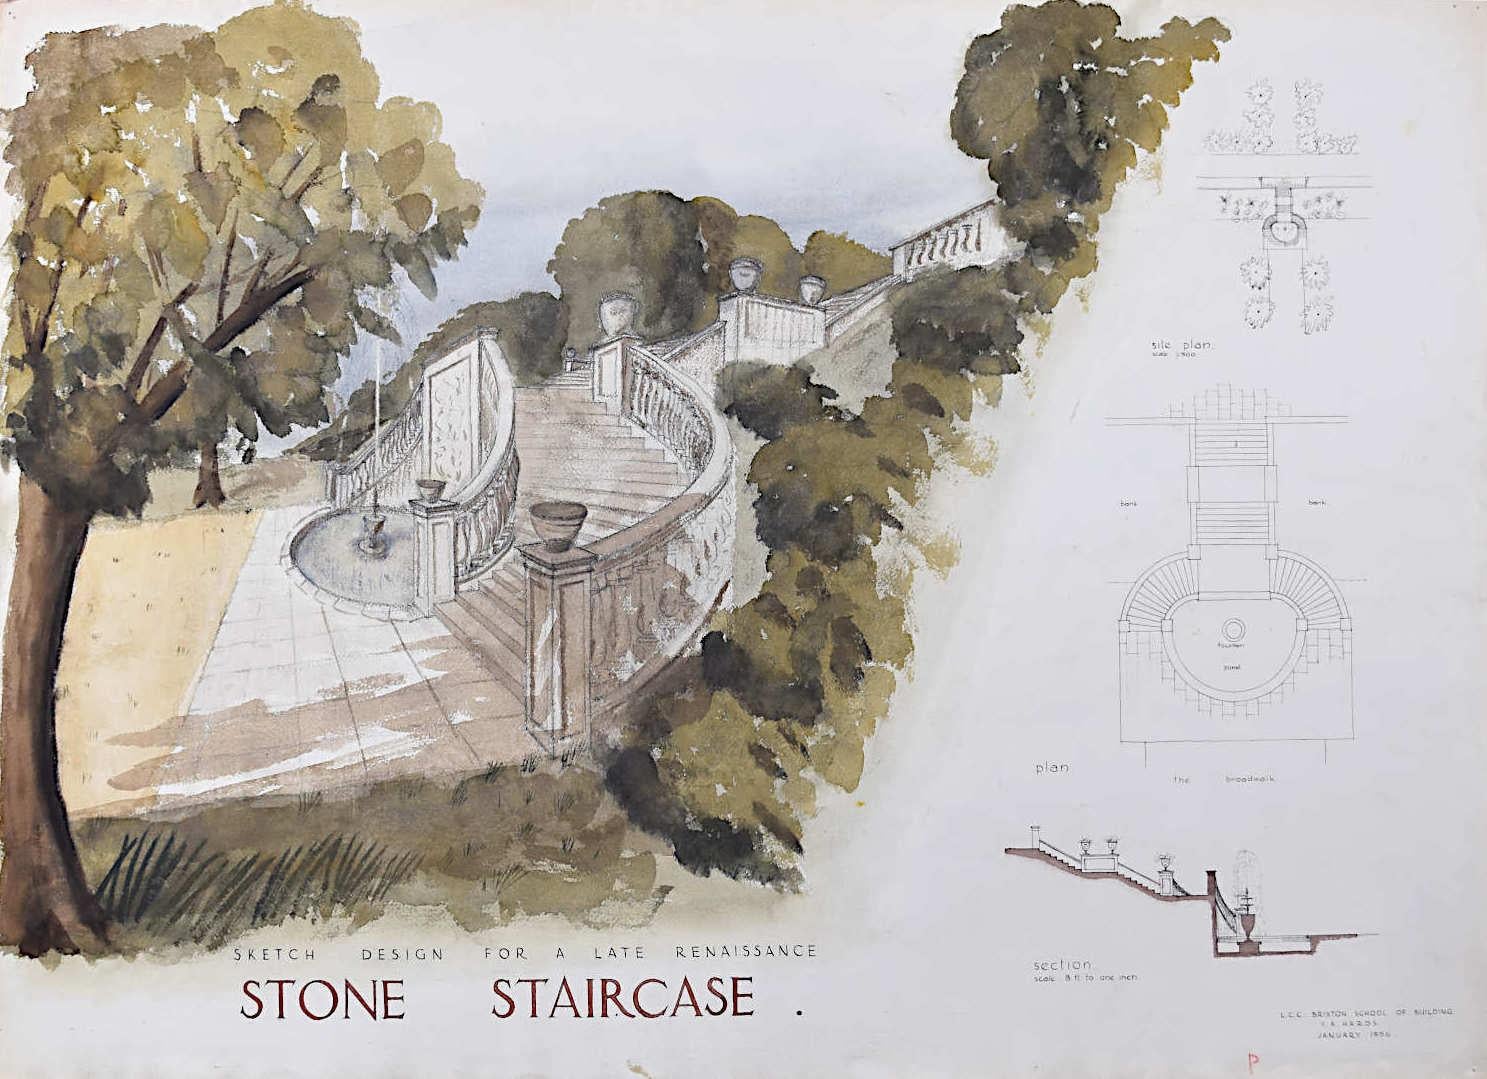 V A Hards Interior Art - Design for a late Renaissance stone staircase mid-century architectural drawing